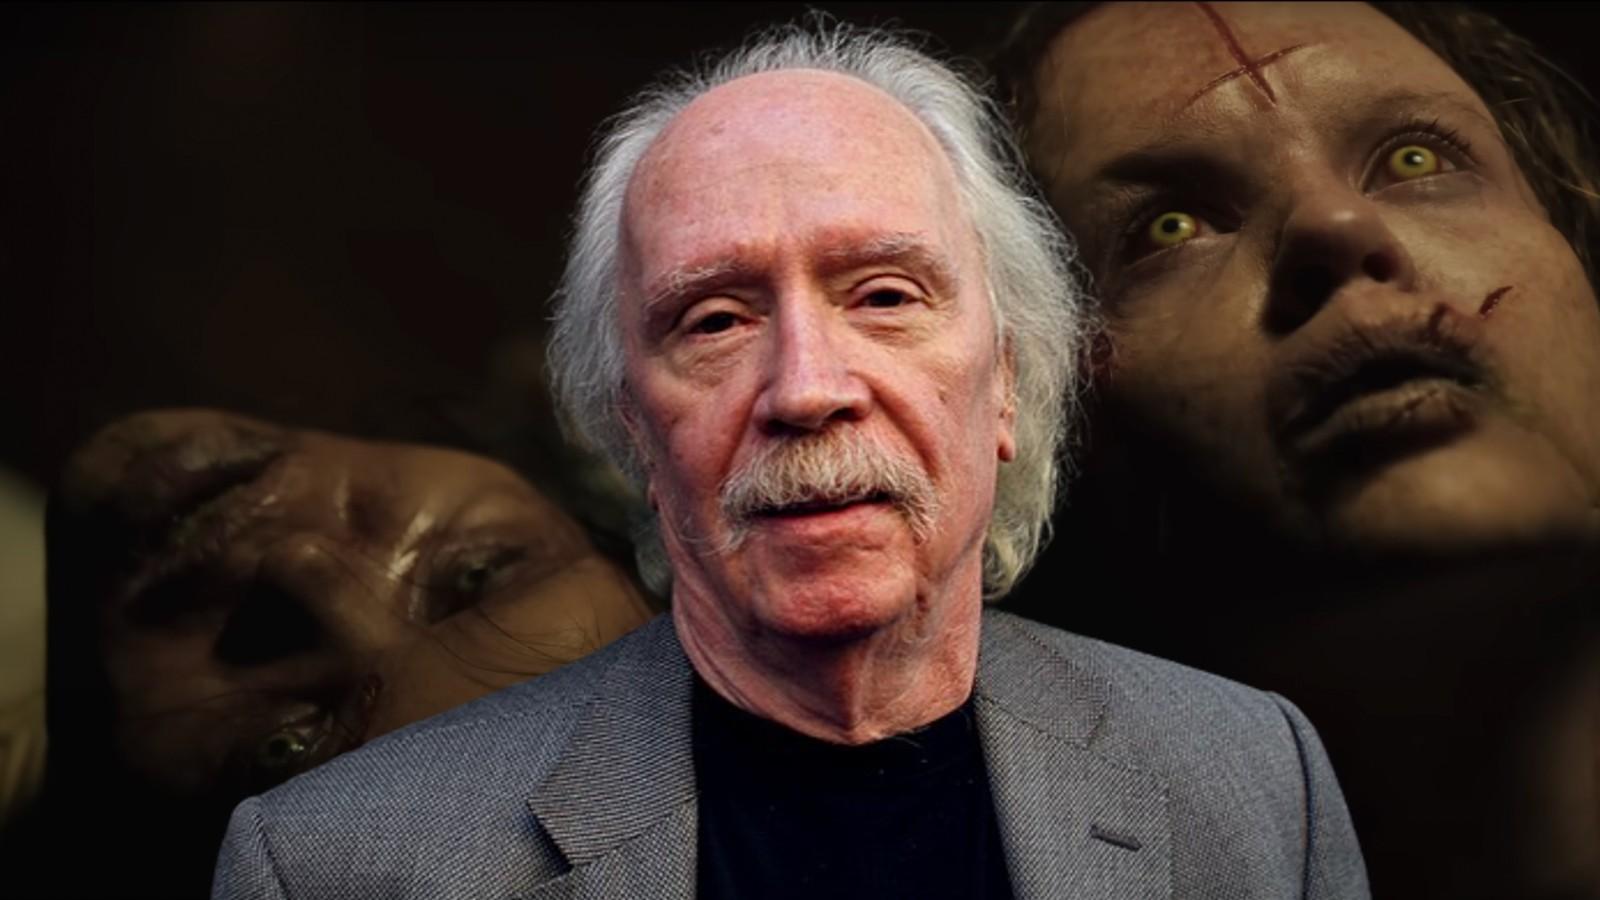 Image of John Carpenter and still from The Exorcist: Believer trailer